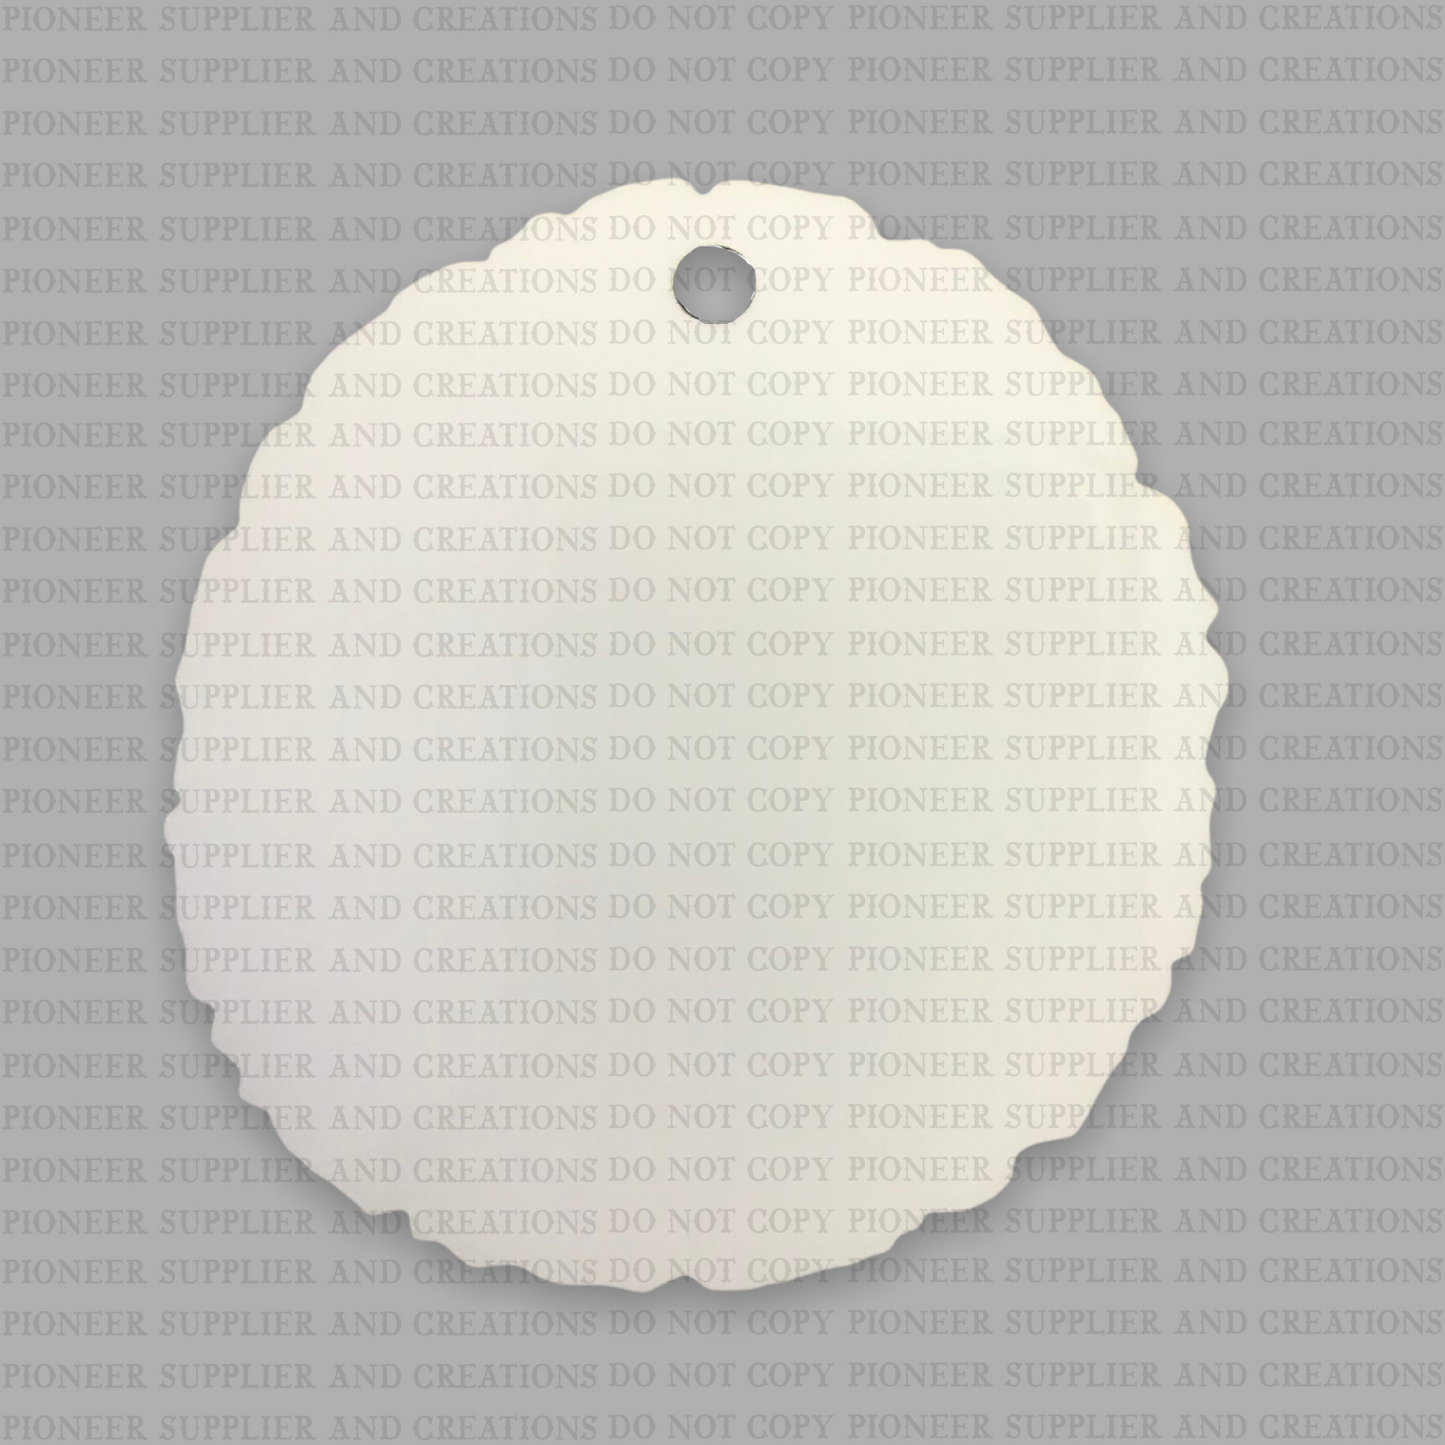 Wood Slice Shaped Ornament Sublimation Blank - Pioneer Supplier & Creations